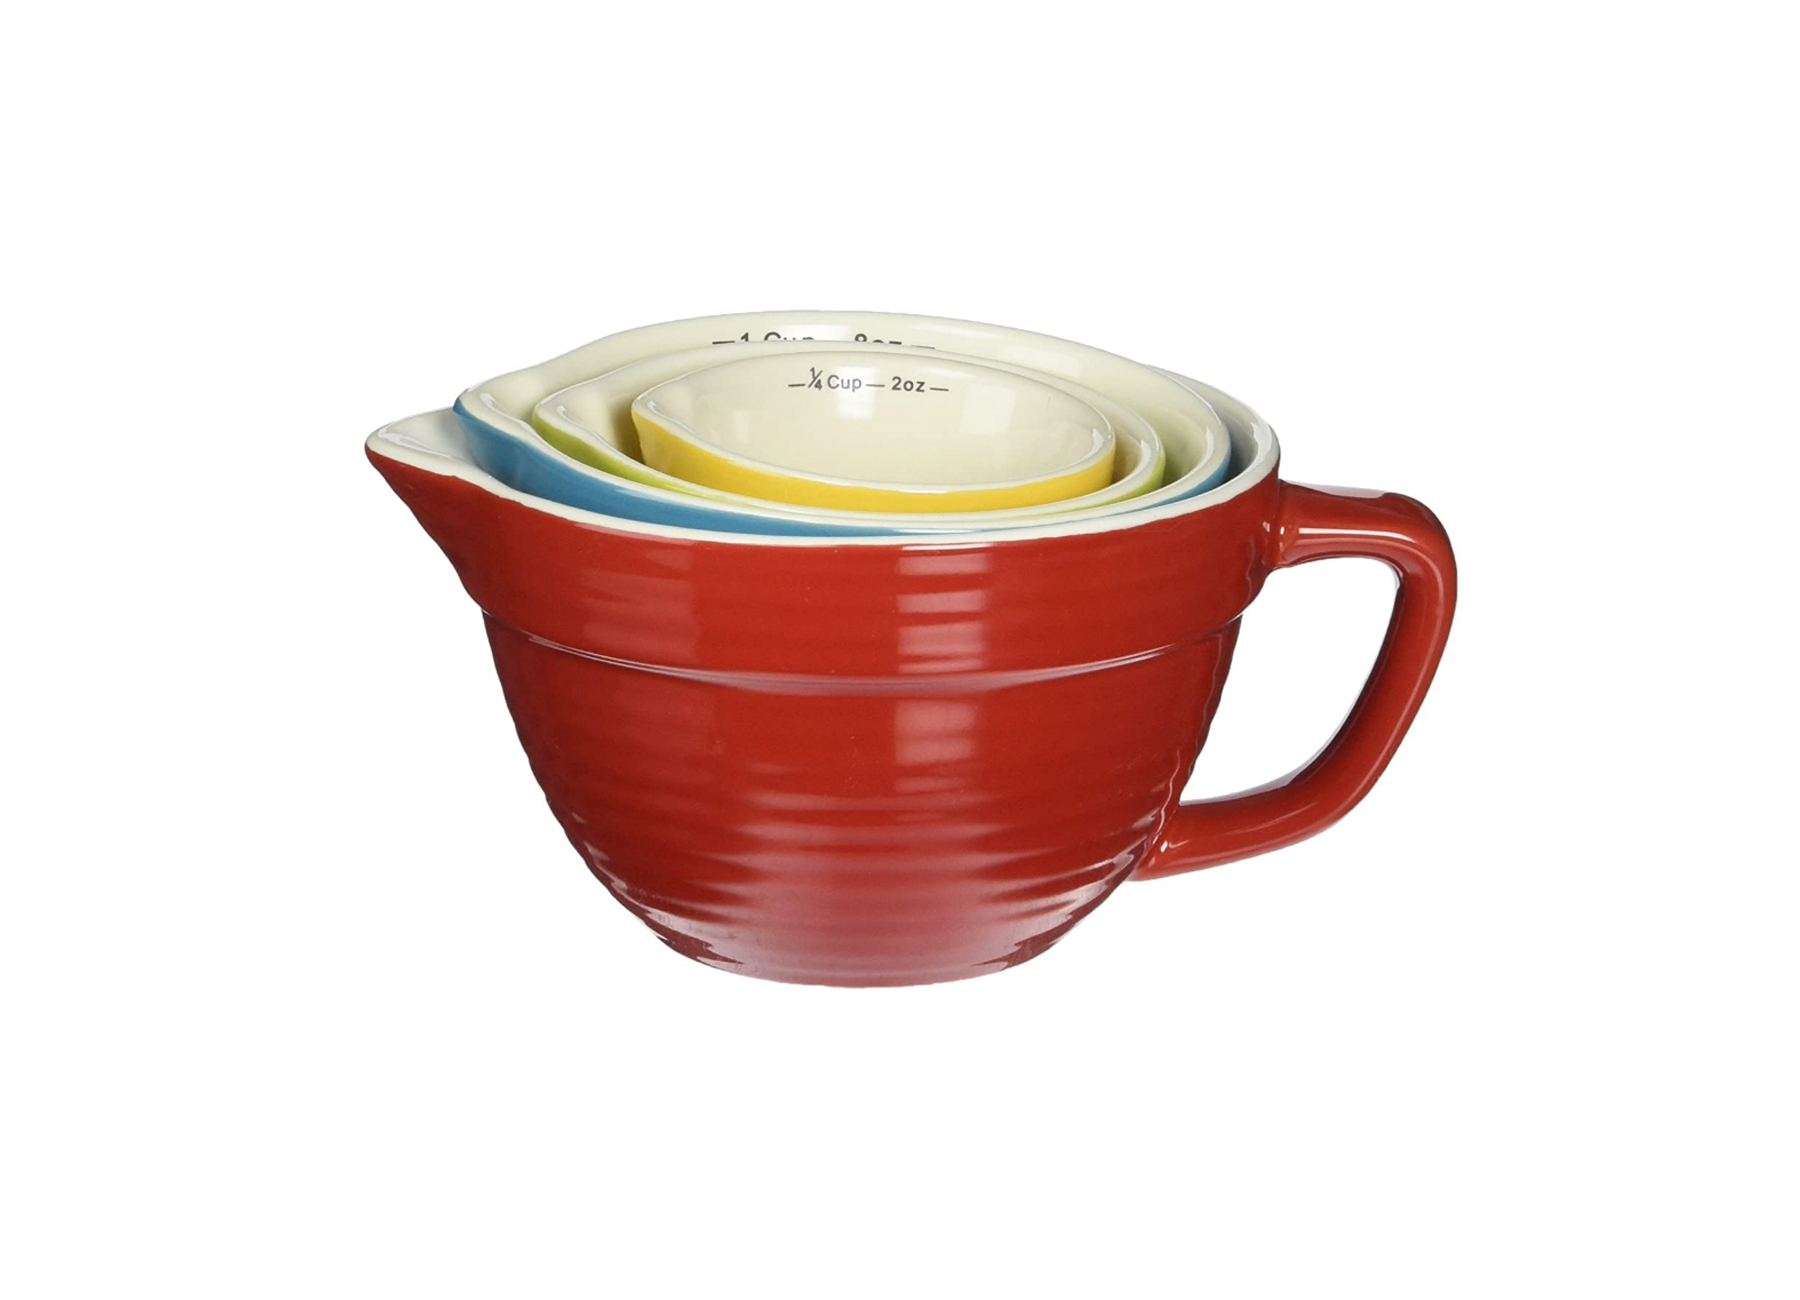 https://www.thefoodie.info/wp-content/uploads/2020/10/colourful_measuring_cups_set.jpg